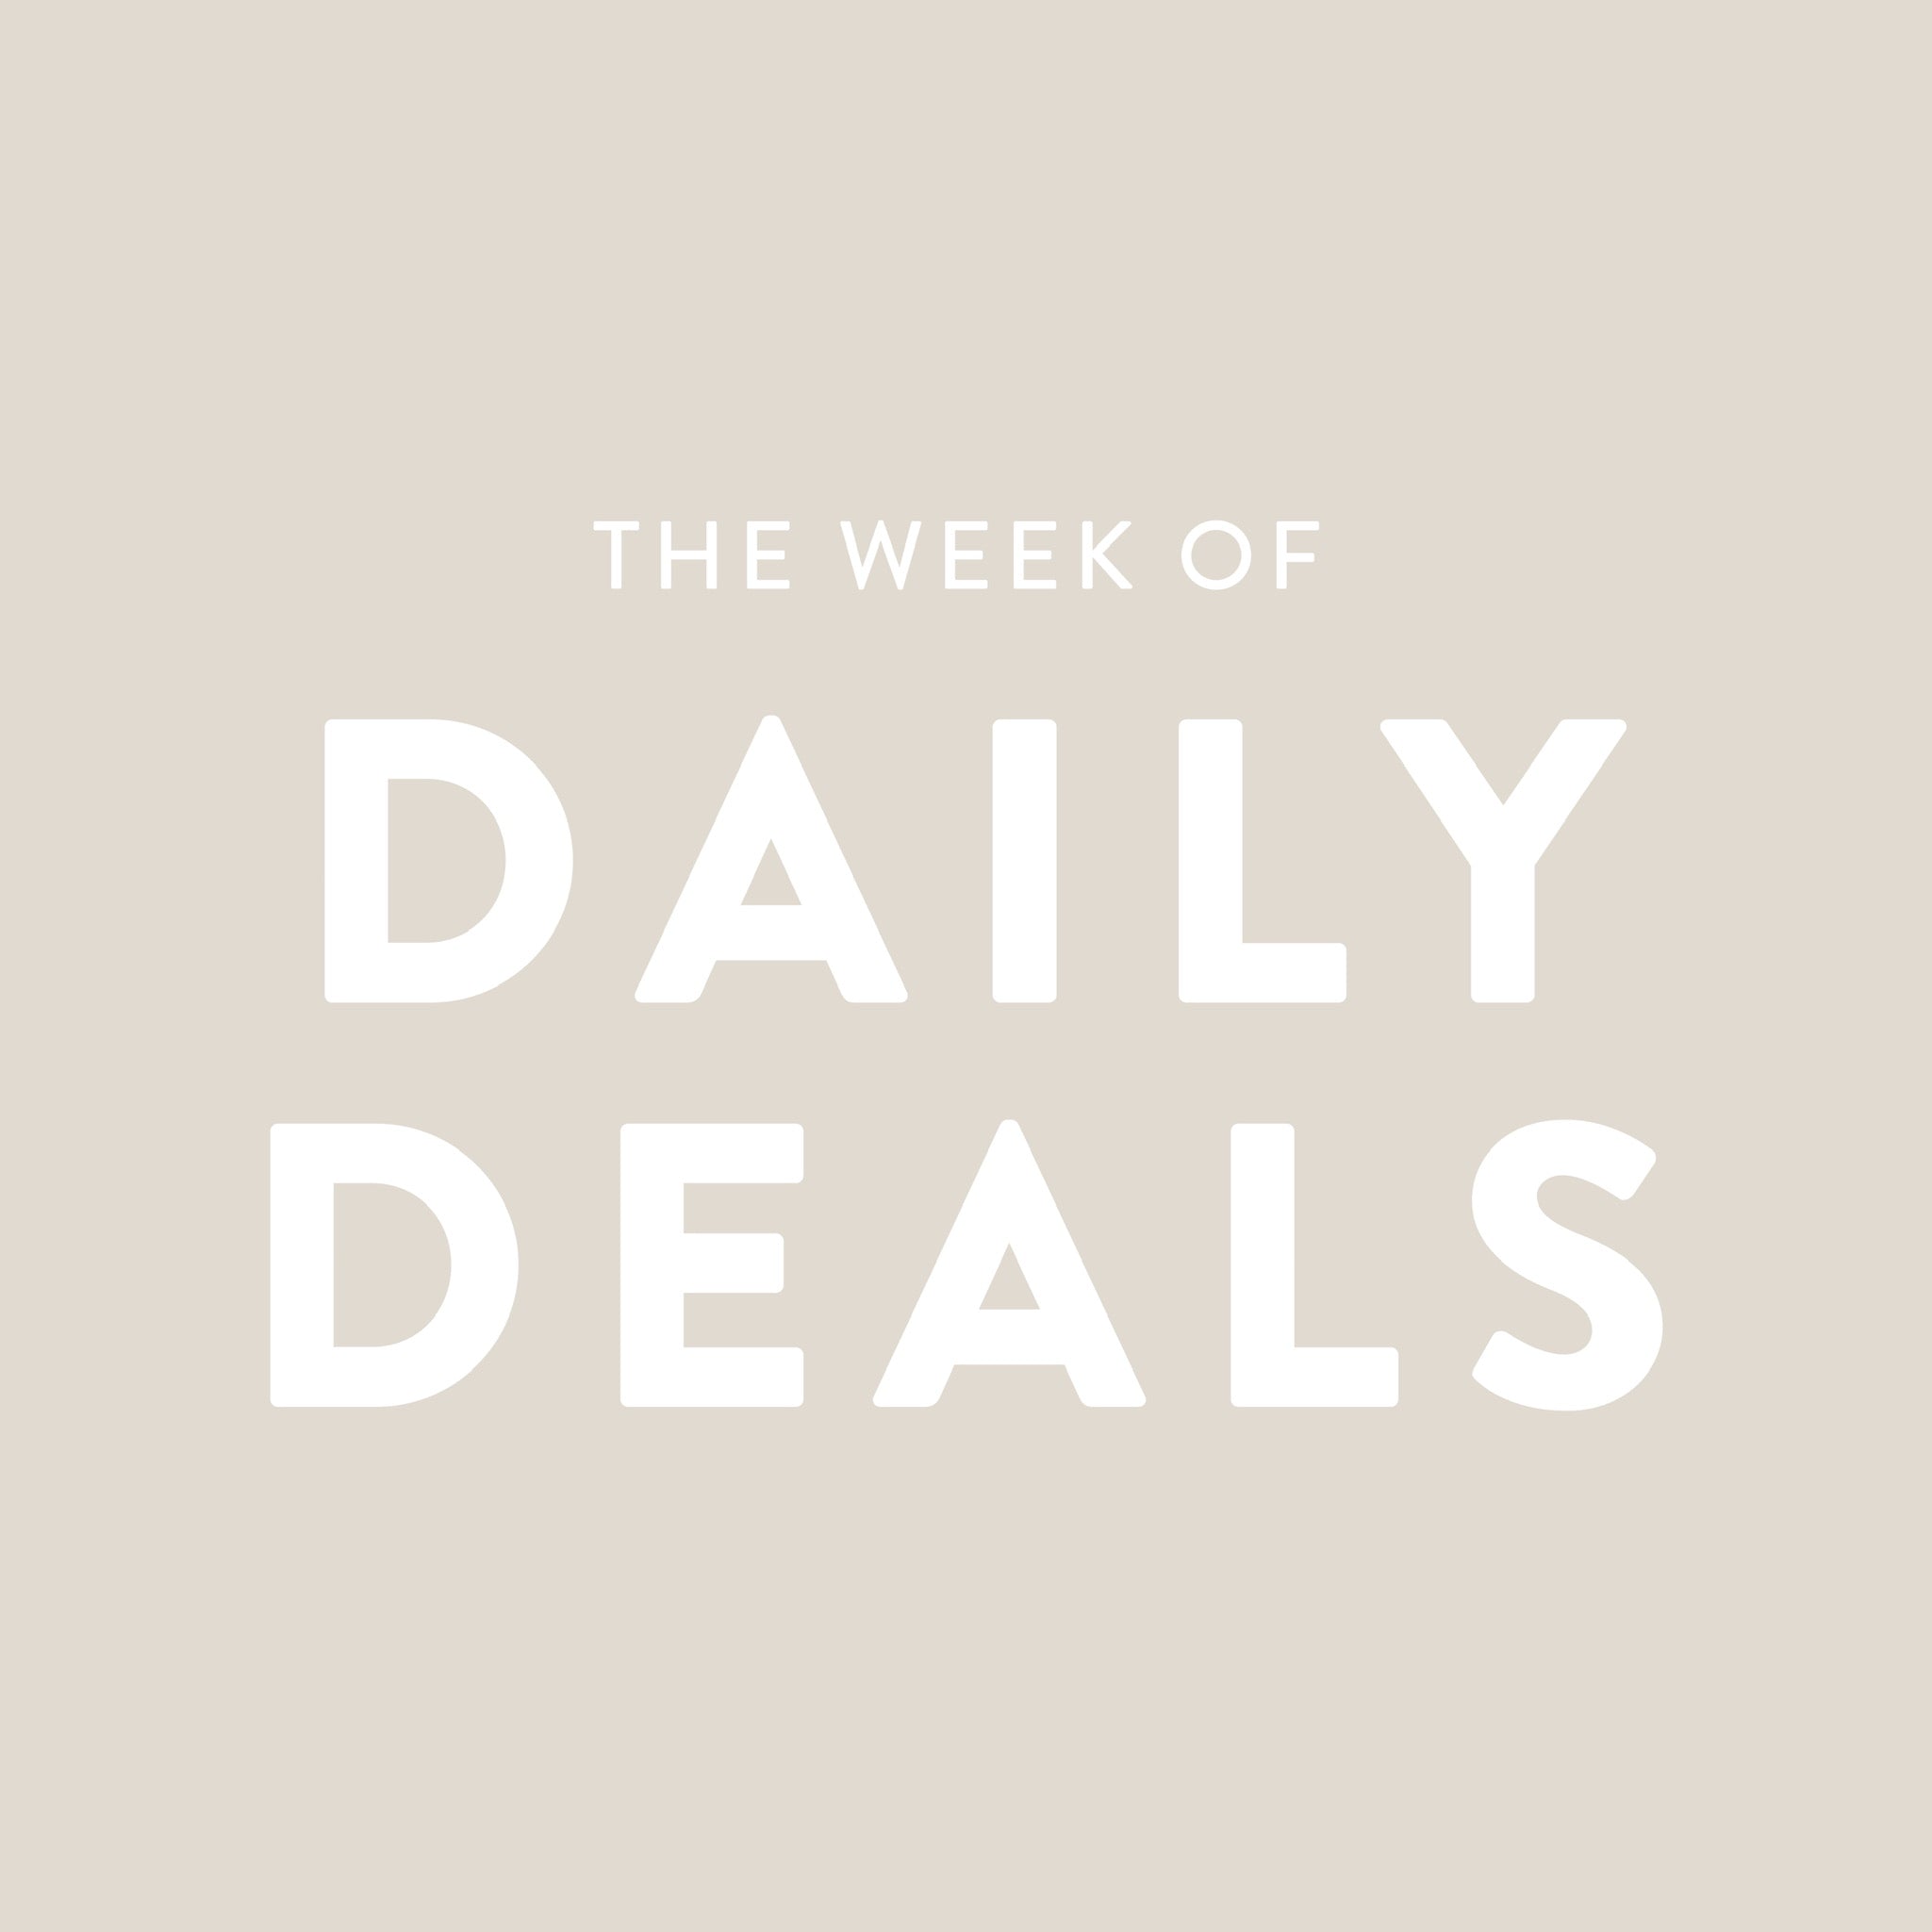 18 Daily Deals!